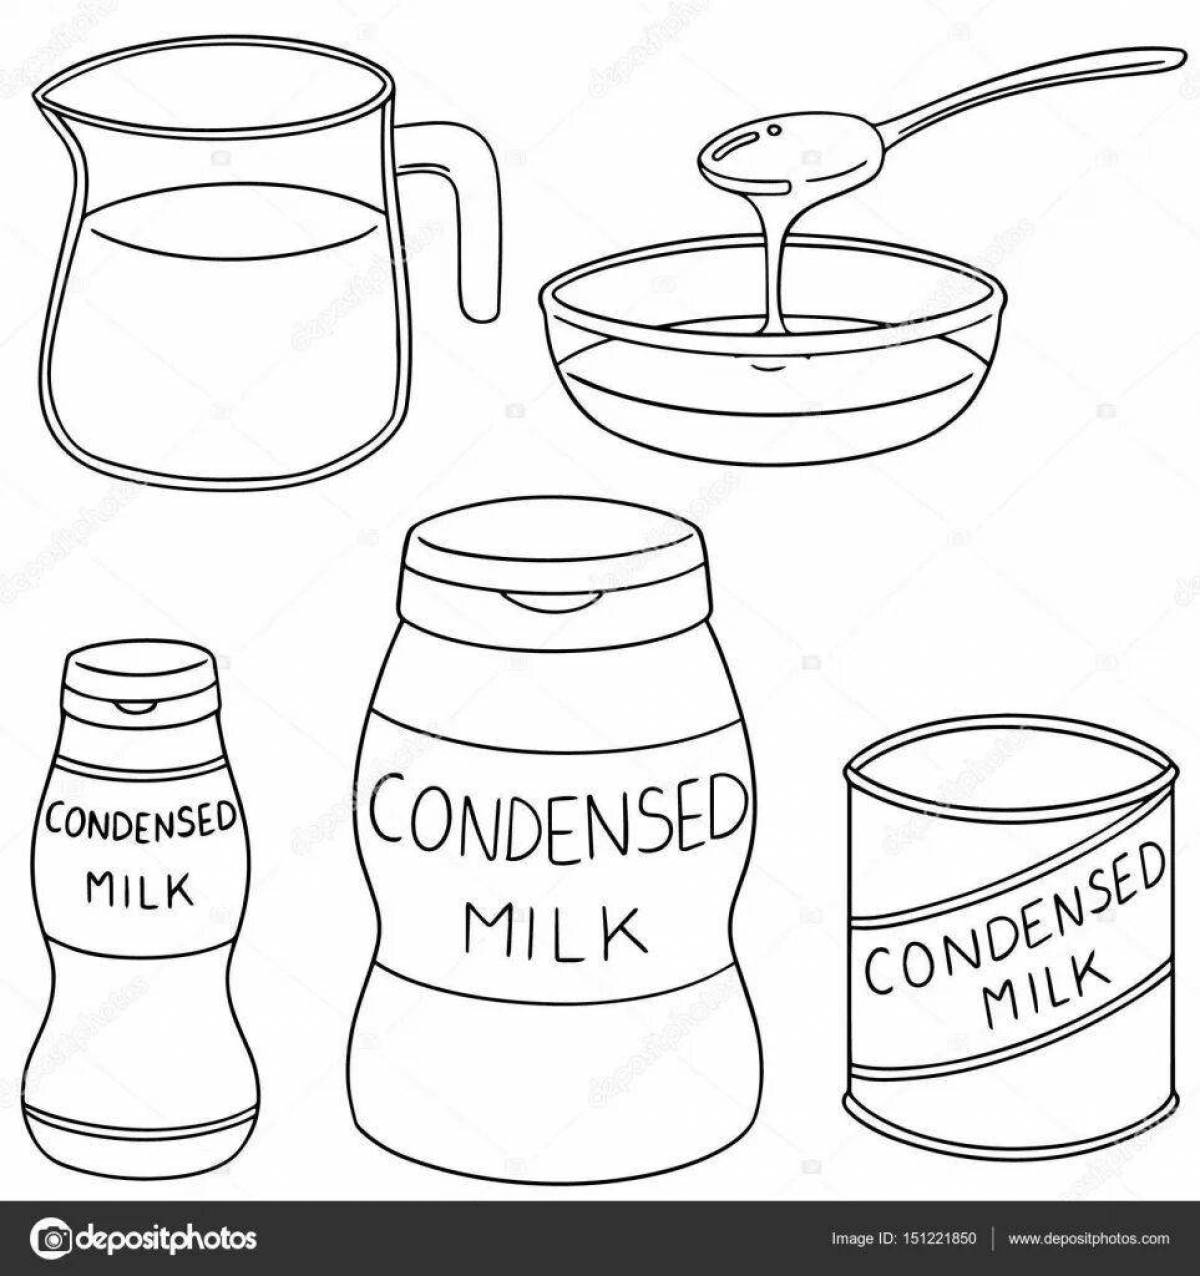 Beautiful condensed milk coloring page